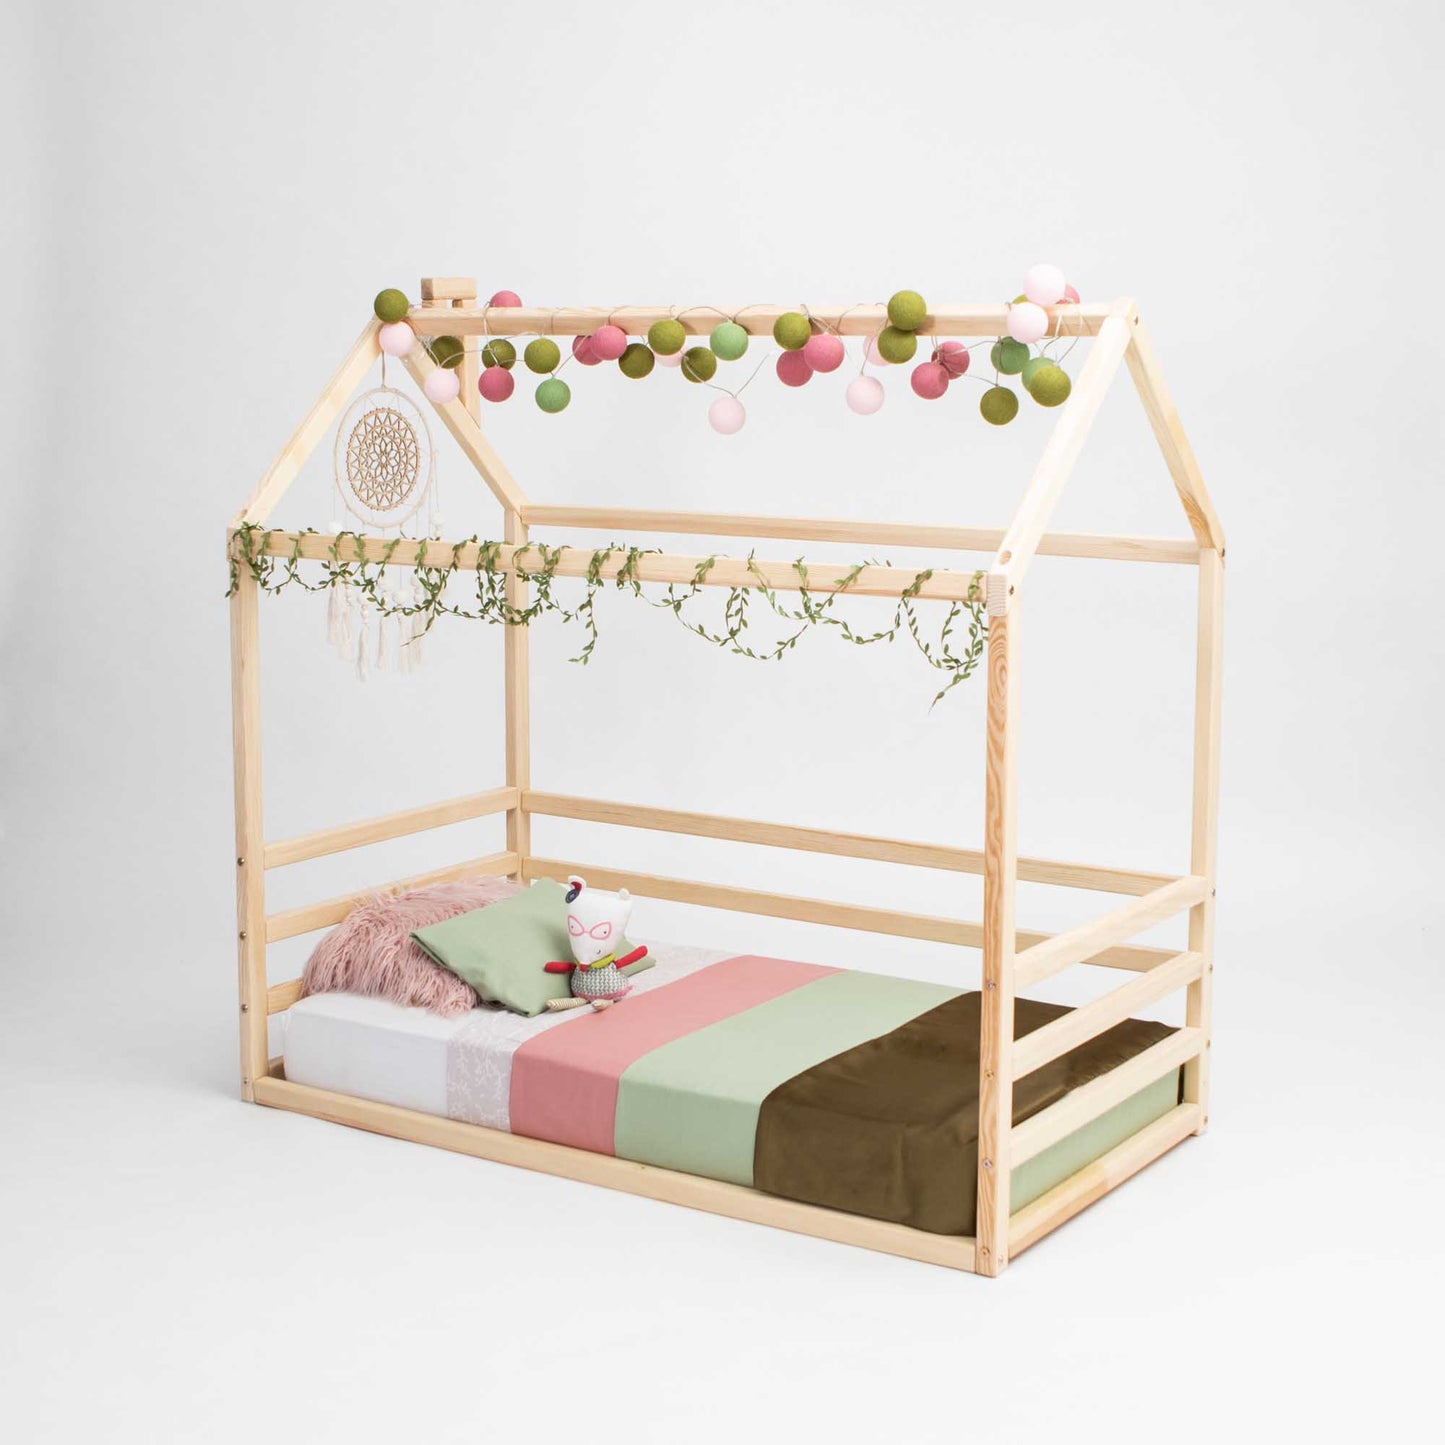 A Kids' house-frame bed with 3-sided horizontal rails with a pink and green canopy.